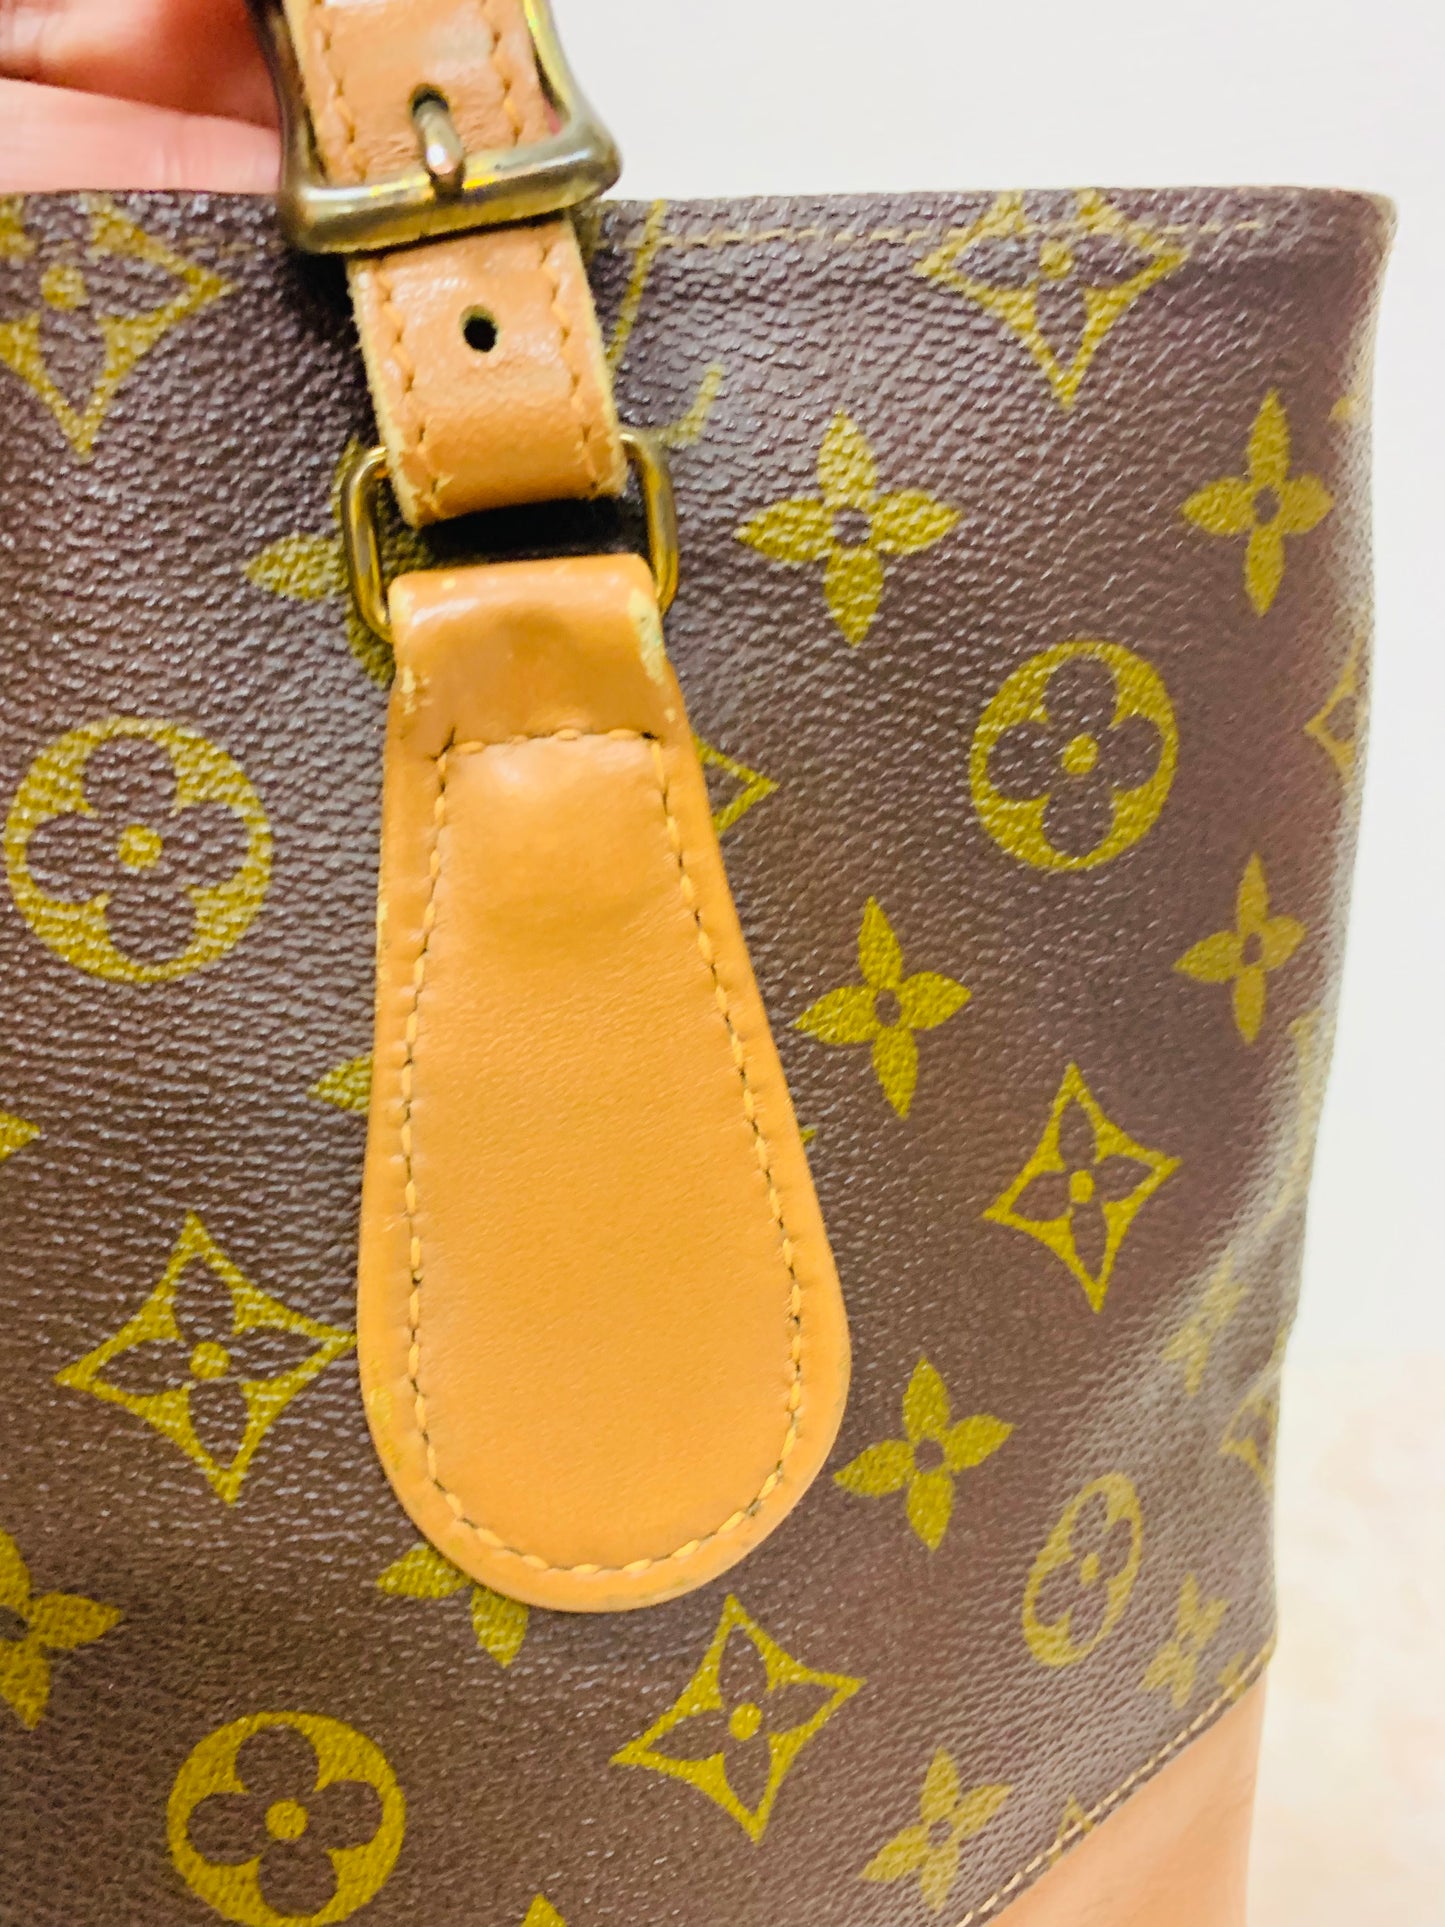 LOUIS VUITTON Bucket GM French and Company